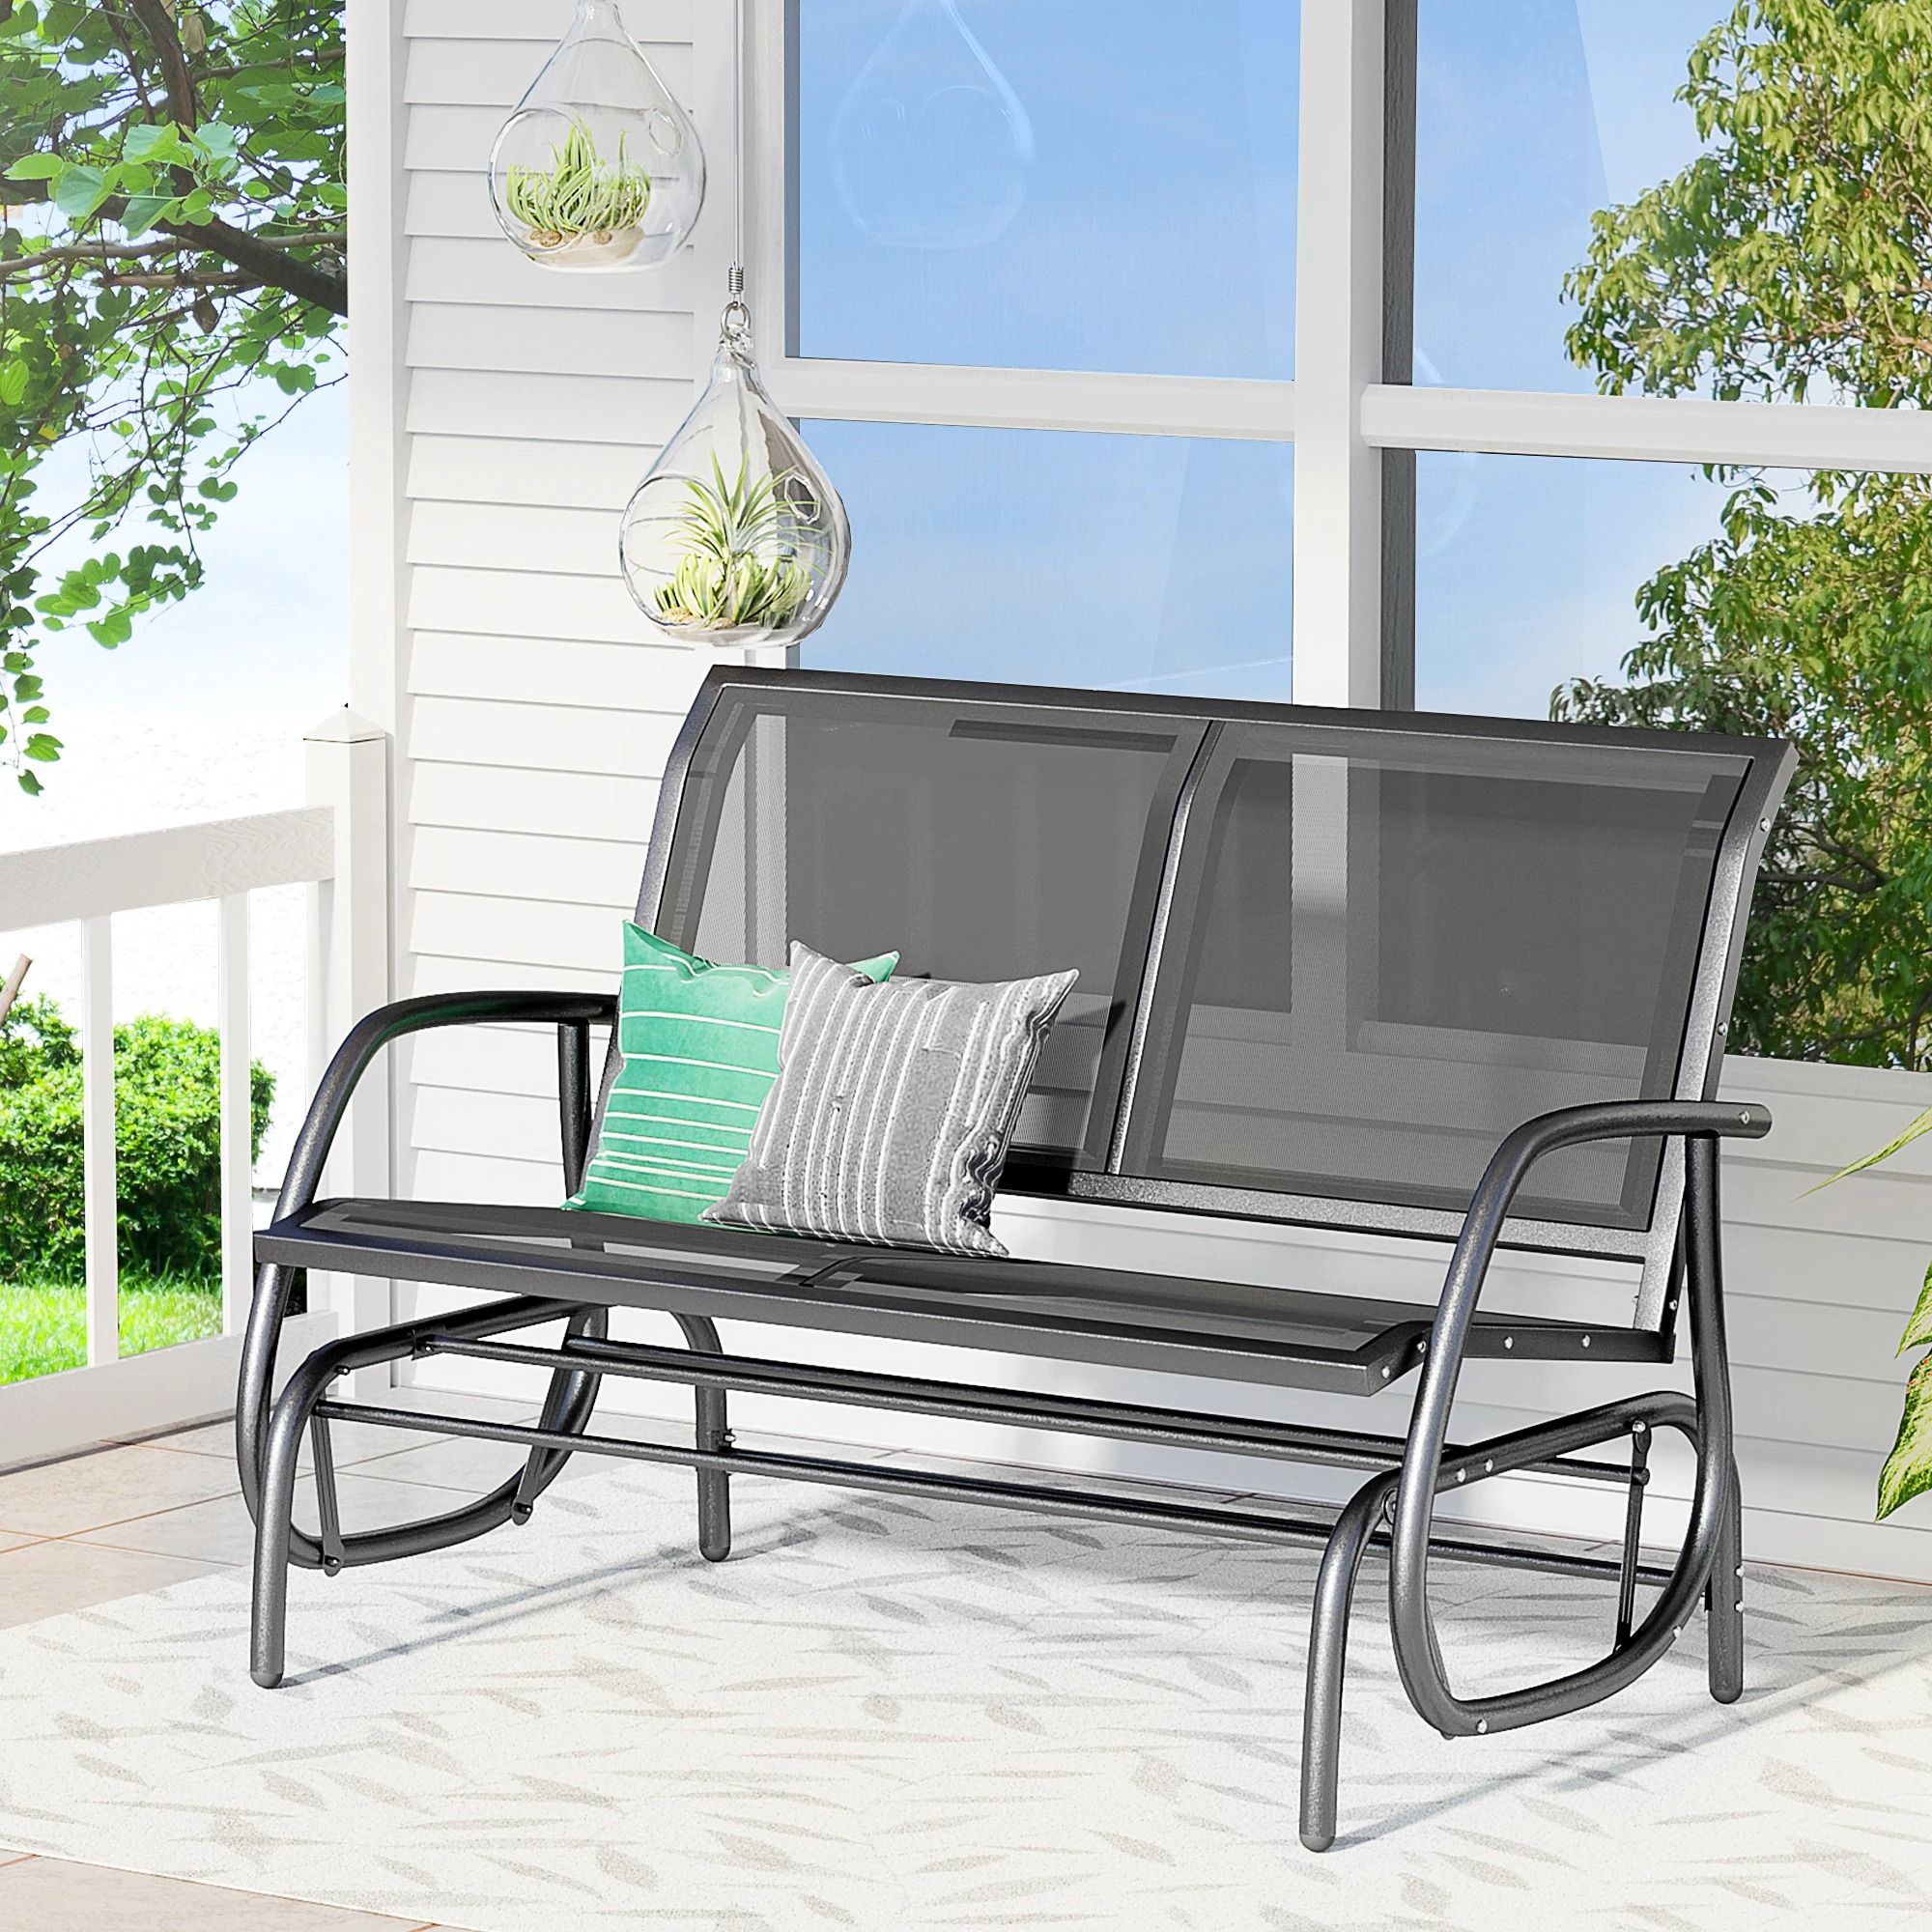 Outsunny Sling Fabric Outdoor Double Glider Rocking Chair Bench - Dark Grey